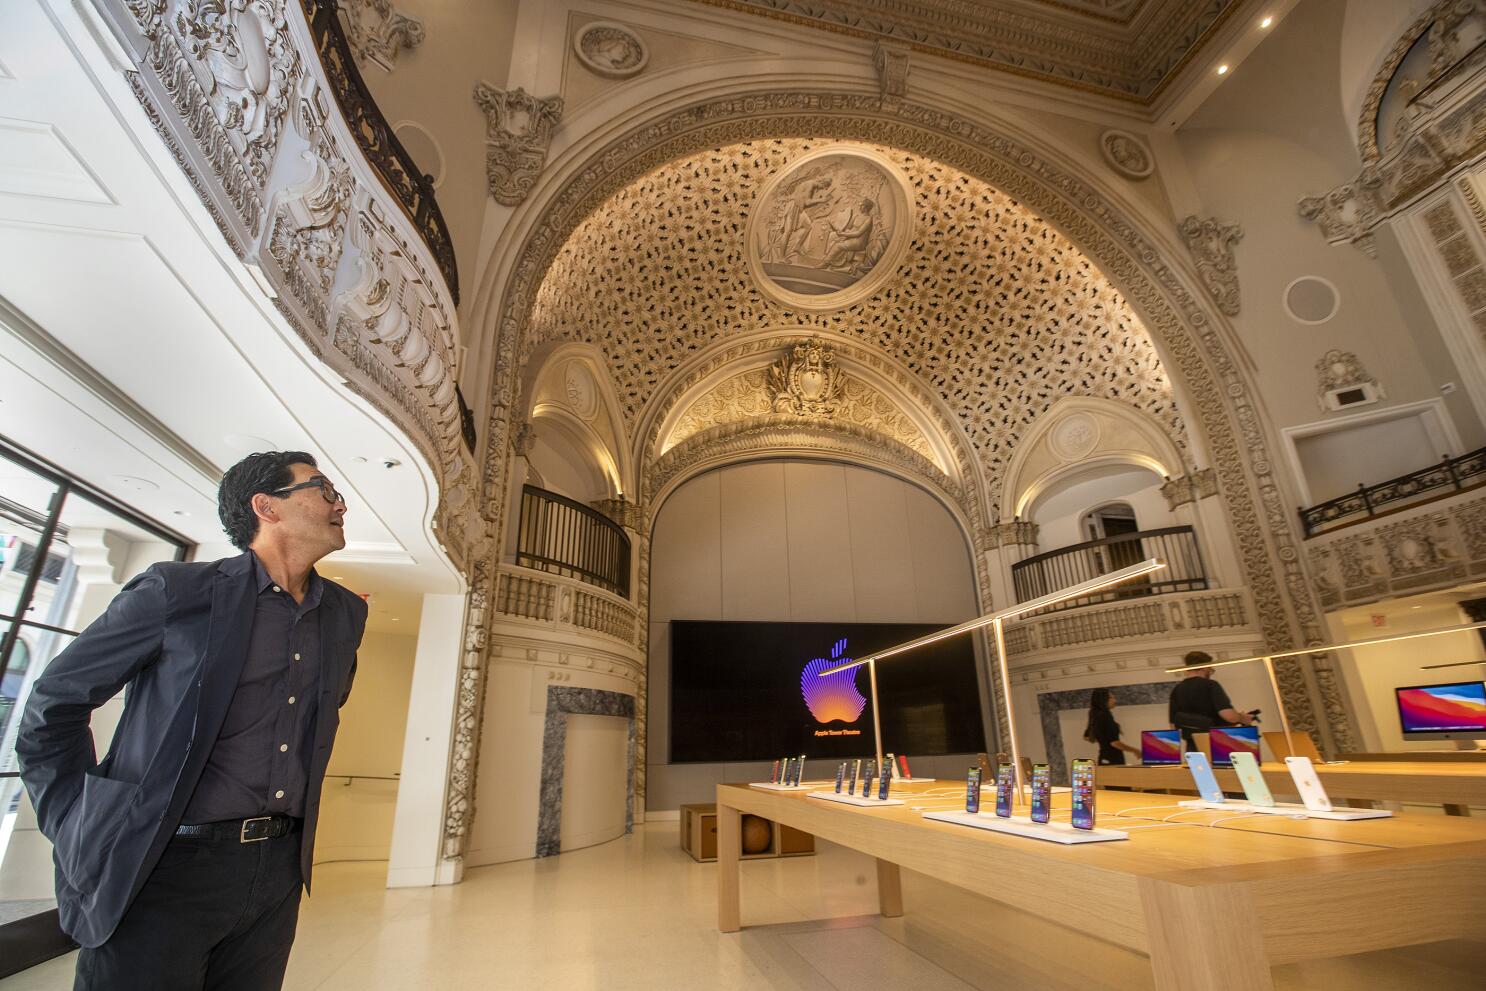 Take a look inside Apple's fancy new downtown L.A. store - Los Angeles Times